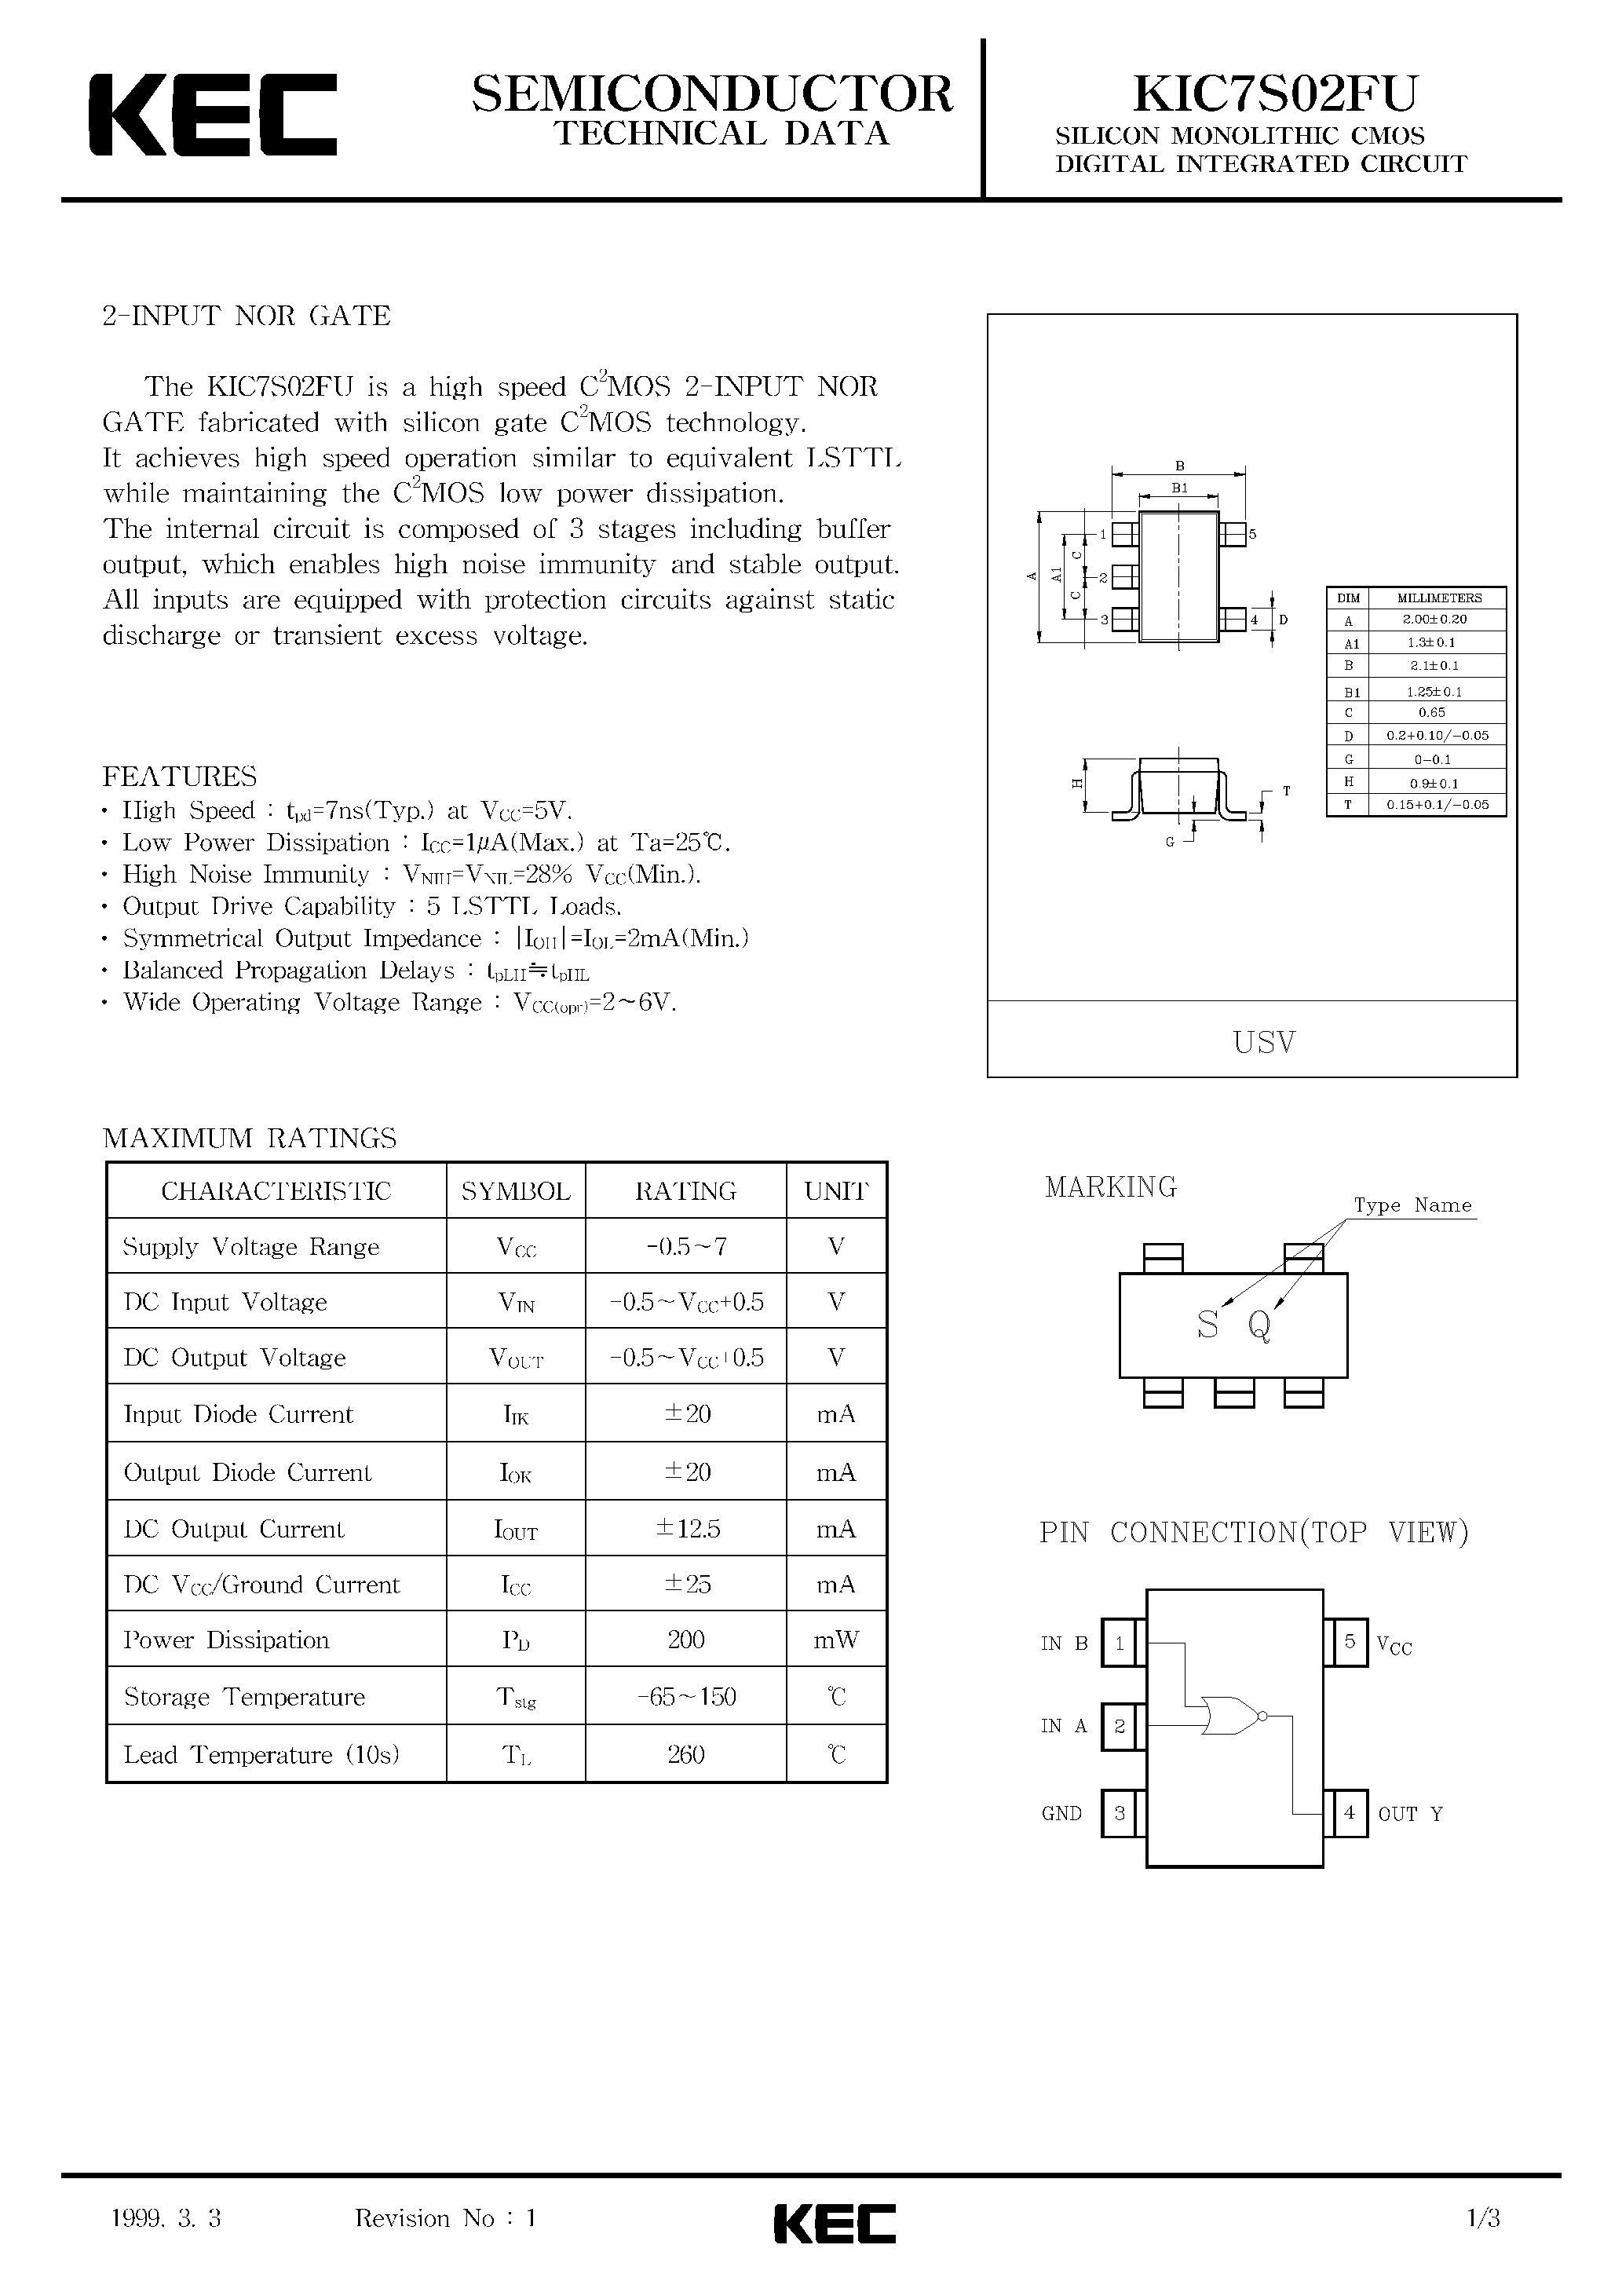 Datasheet KIC7S02FU - SILICON MONOLITHIC CMOS DIGITAL INTEGRATED CIRCUIT(2-INPUT NOR GATE) page 1